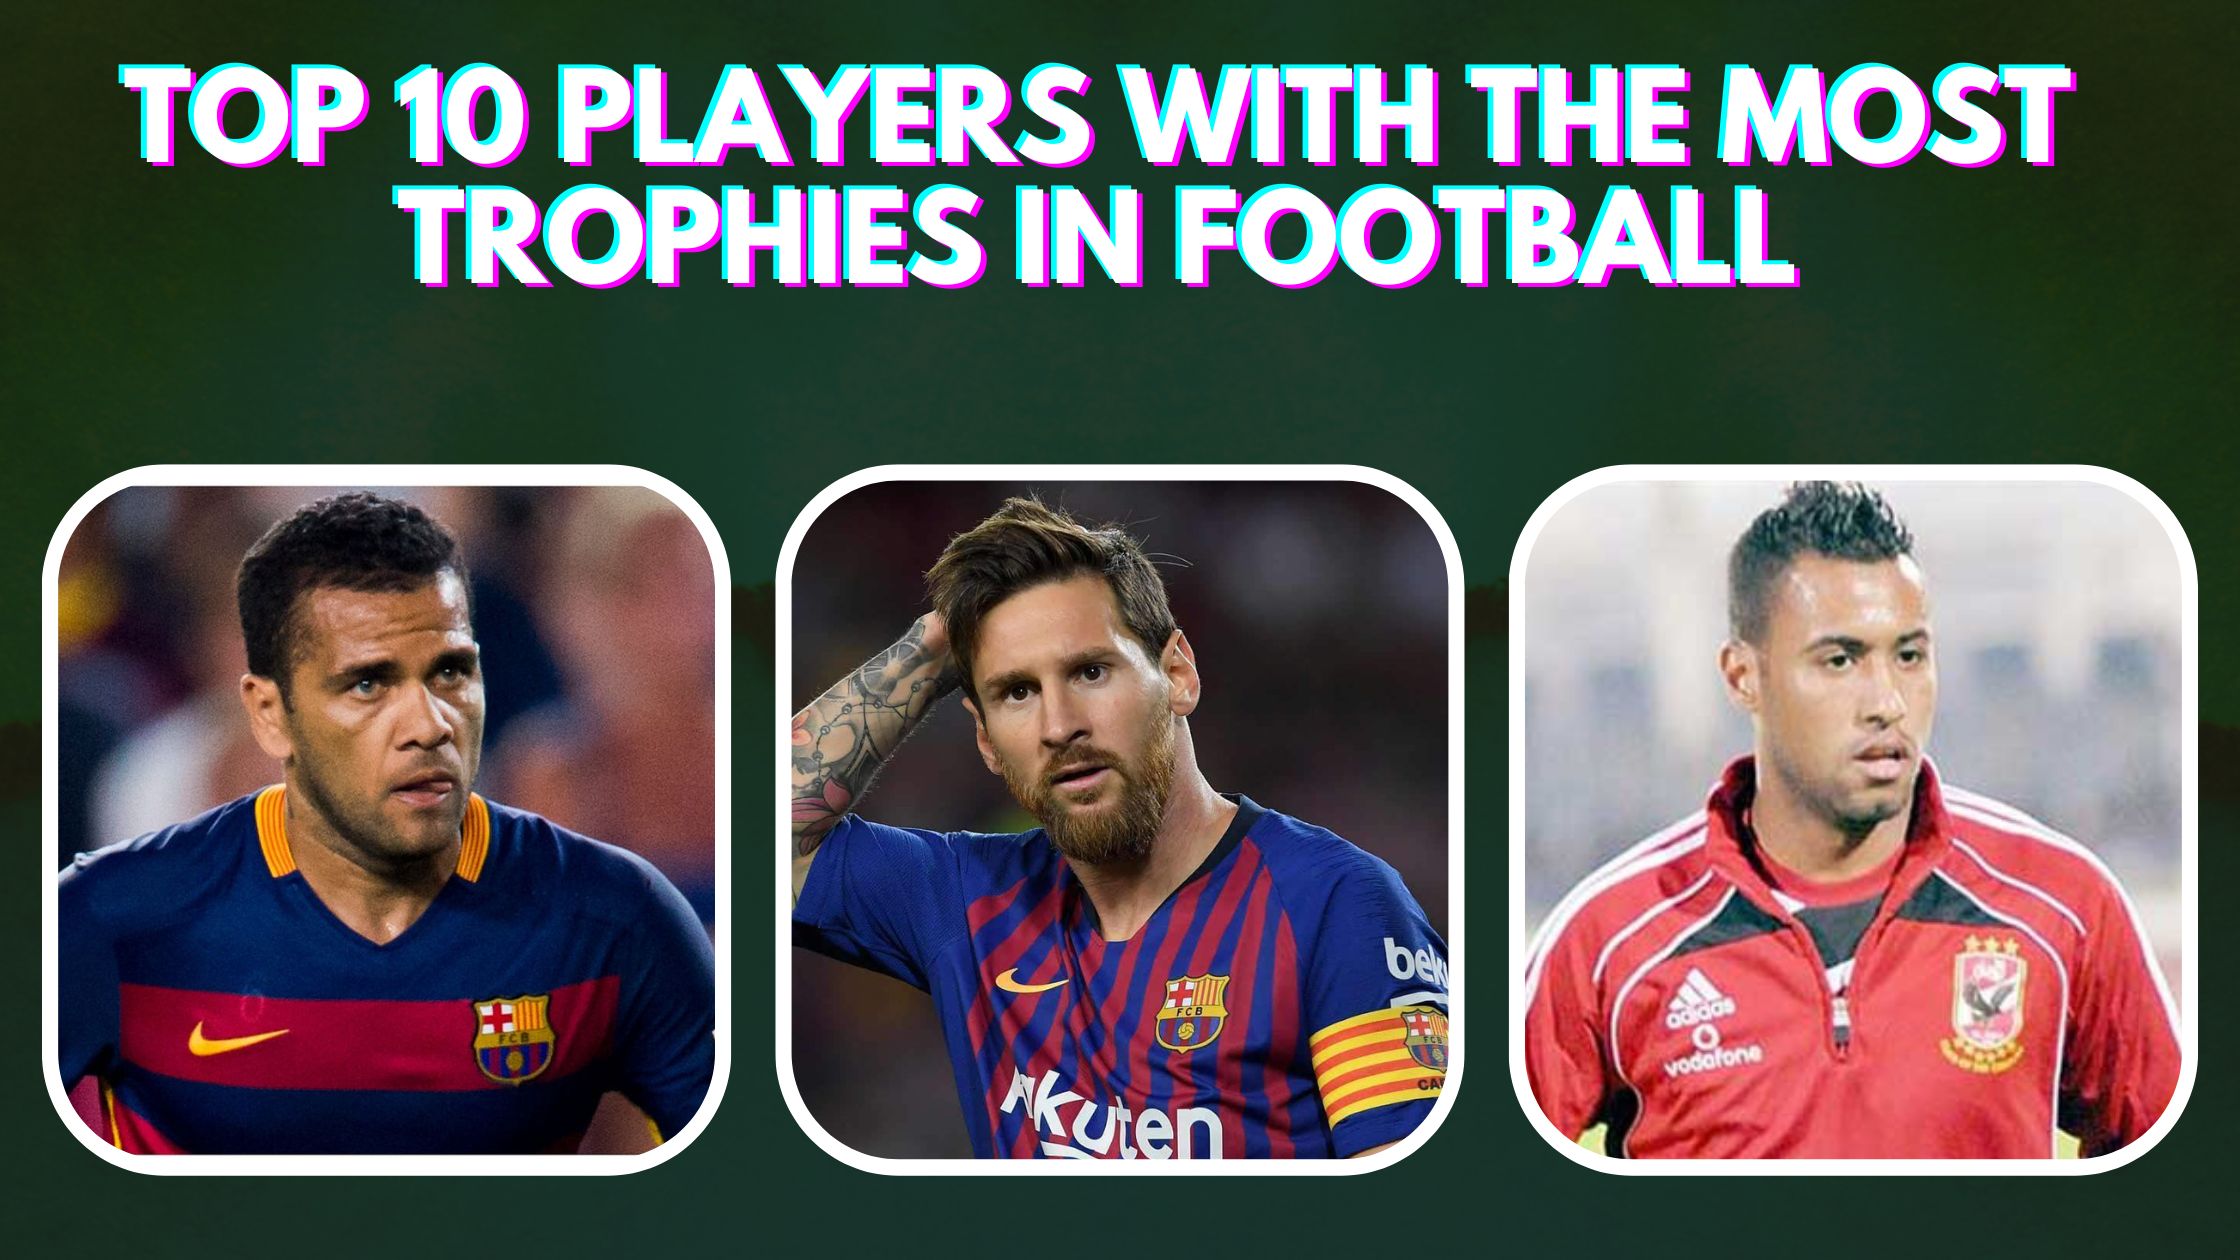 Top 10 Players With the Most Trophies in Football